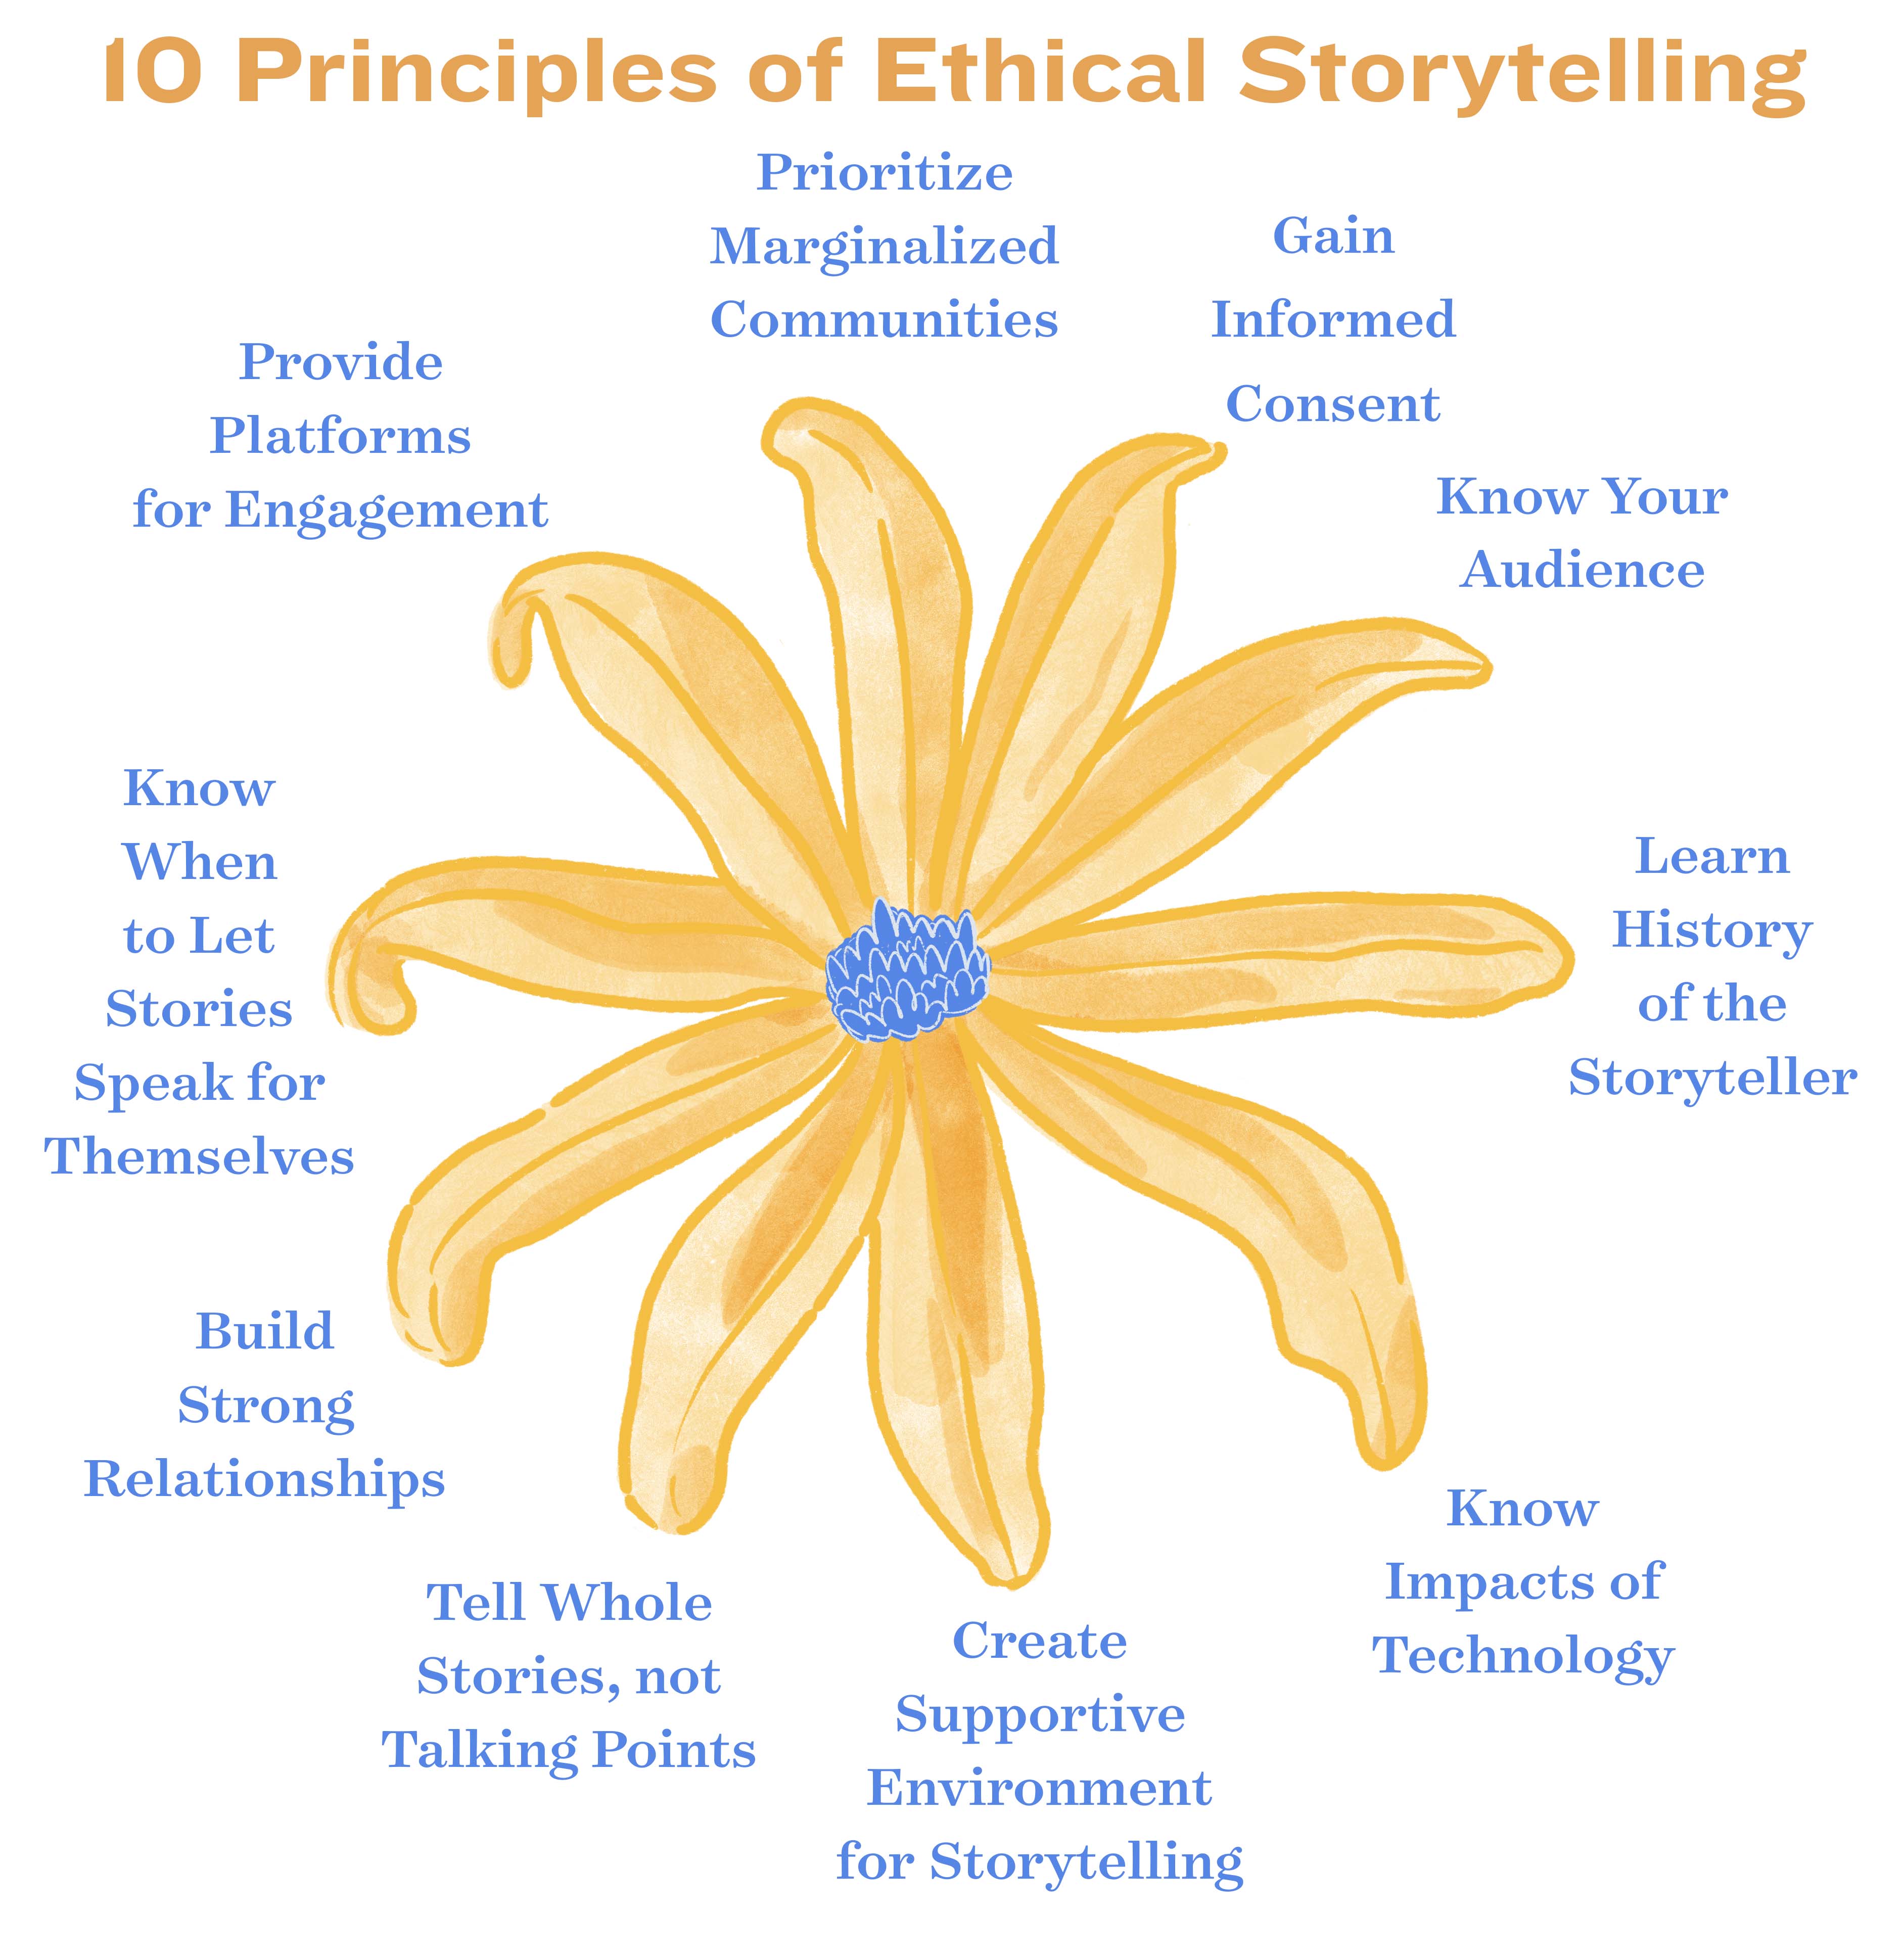 10 Principles of Ethical Storytelling